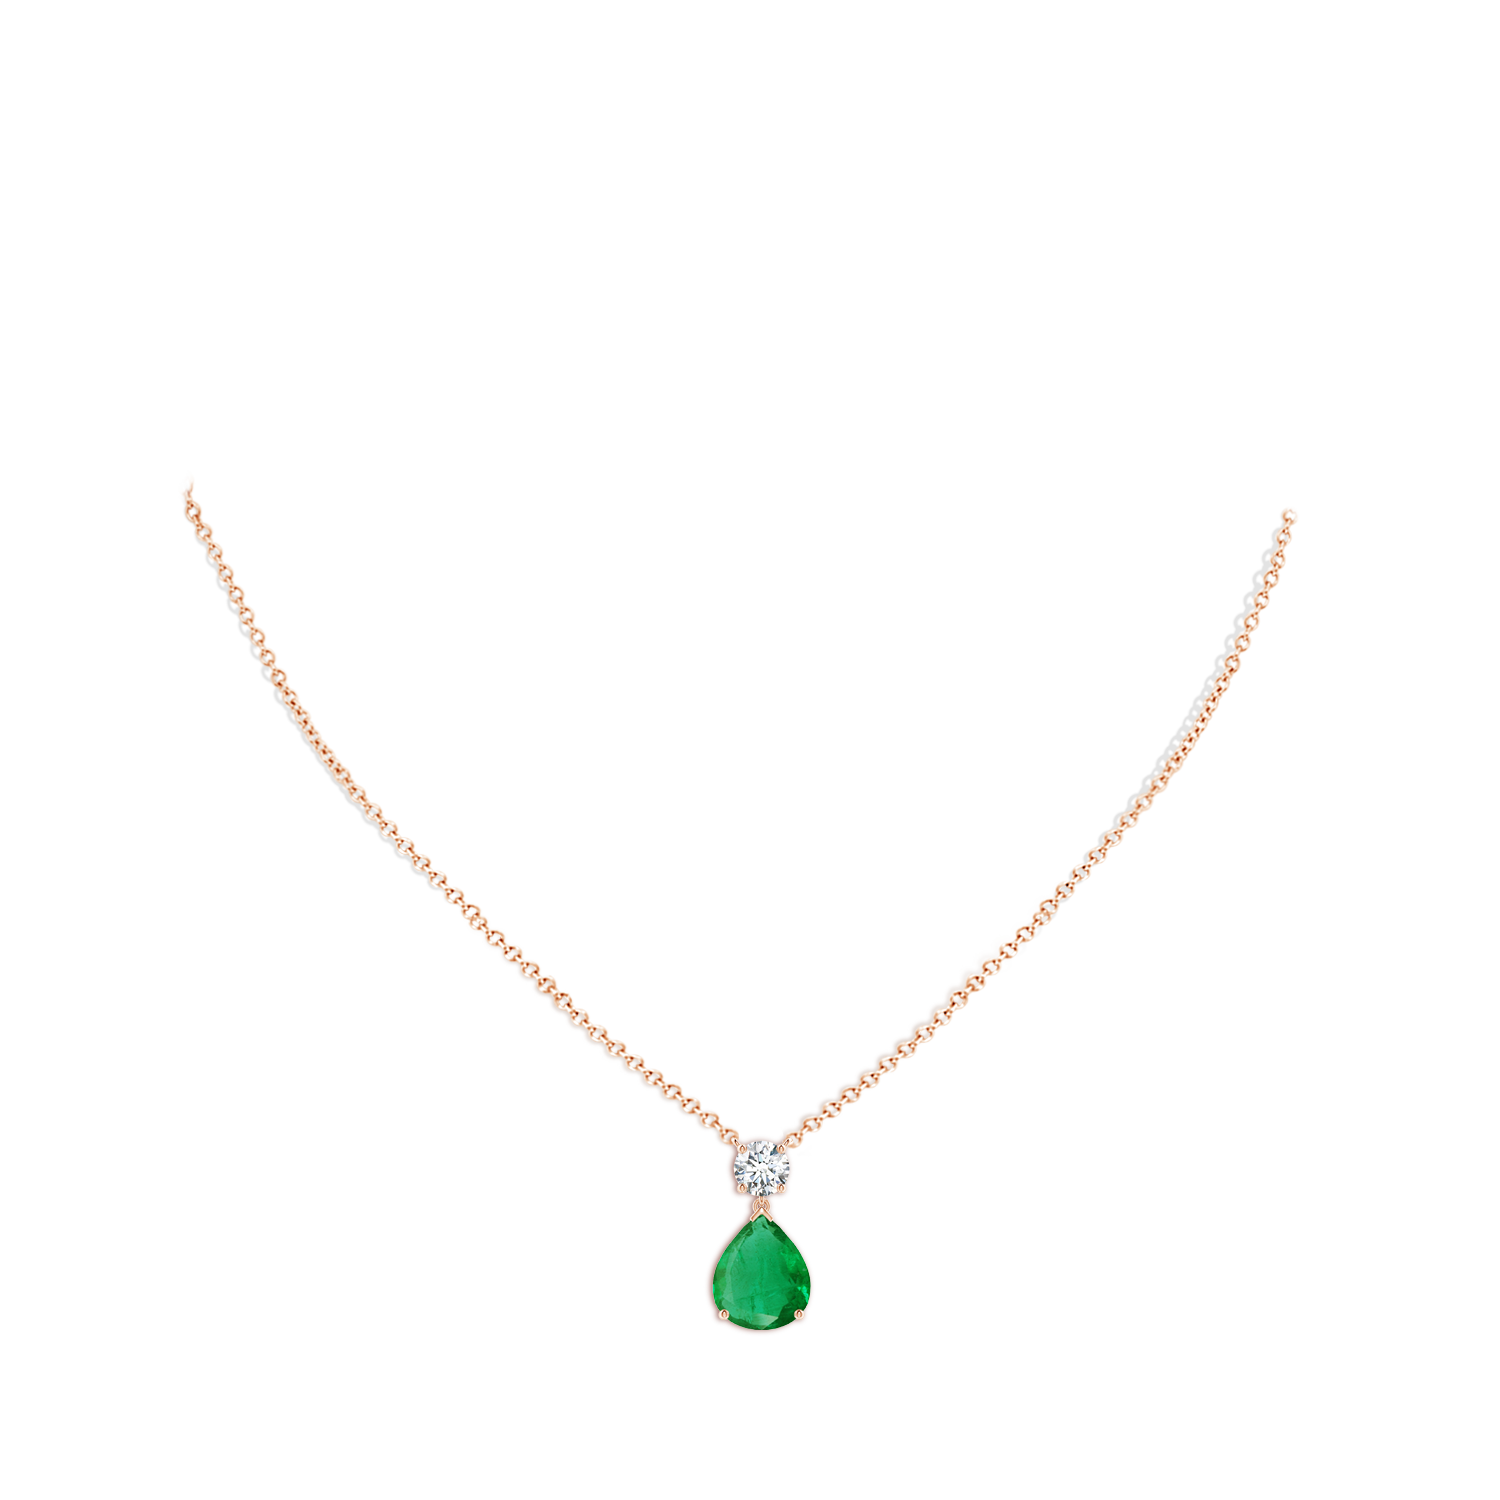 AA - Emerald / 5.21 CT / 18 KT Rose Gold